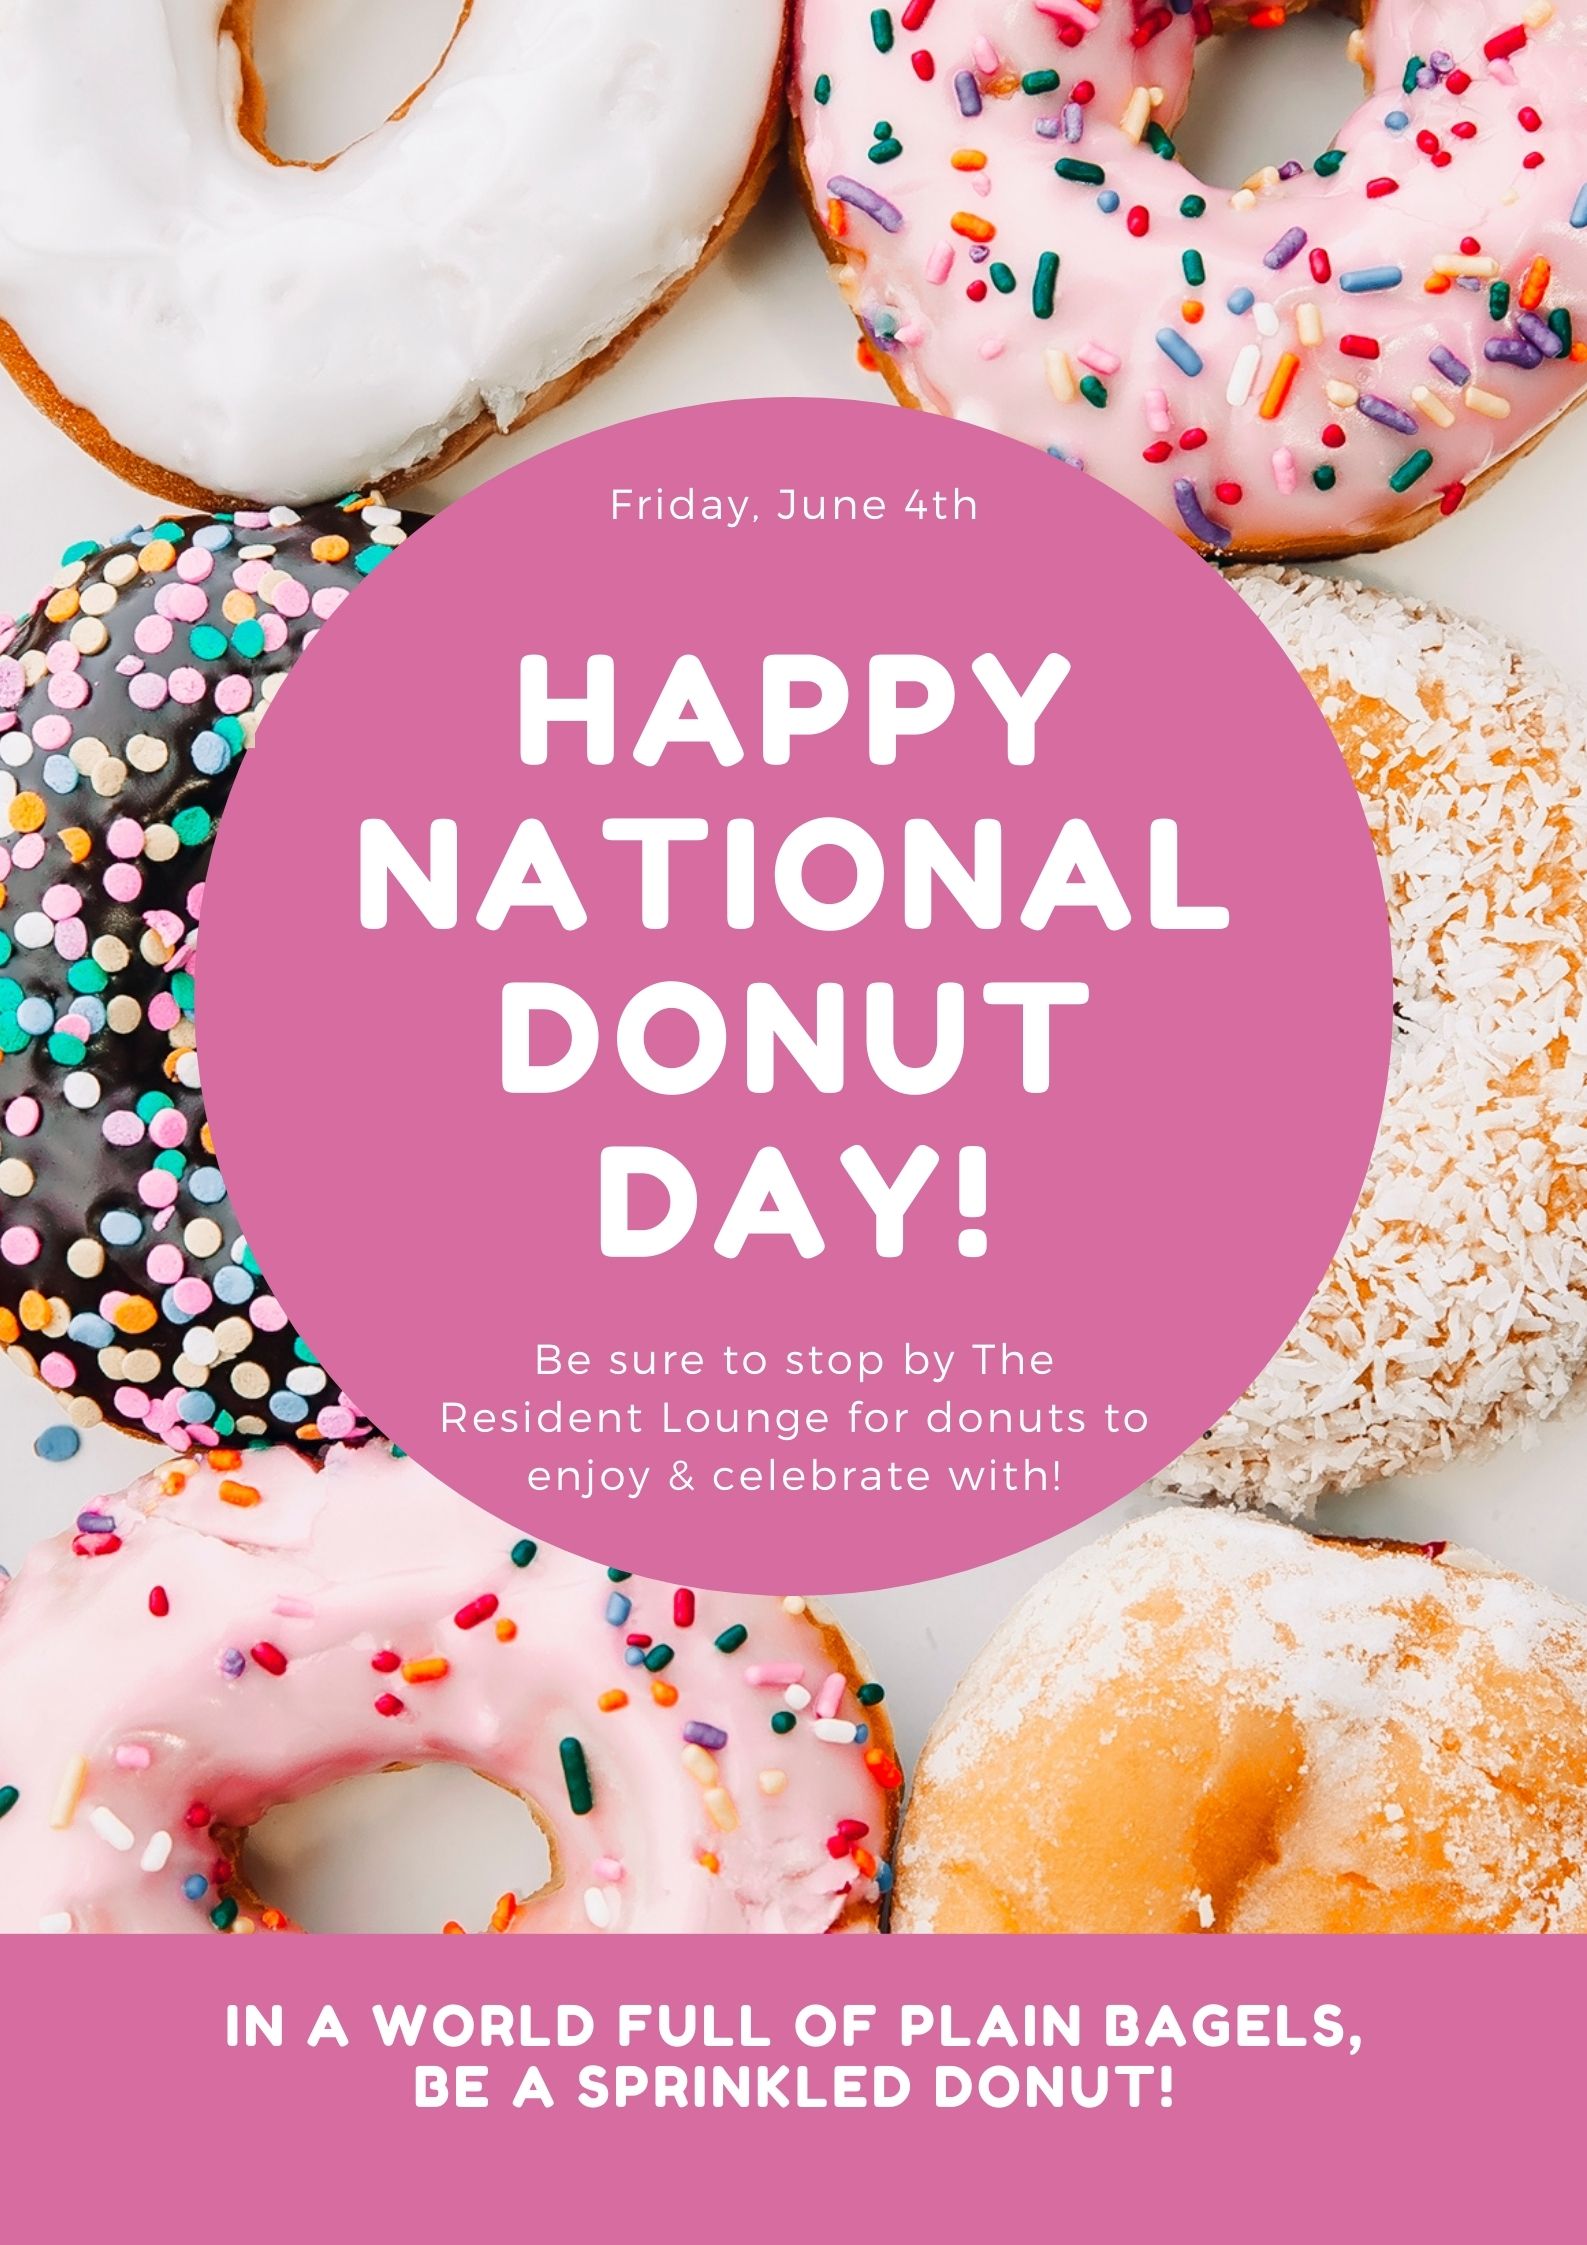 Happy national donut day flyer featuring Apartments in The Woodlands TX.